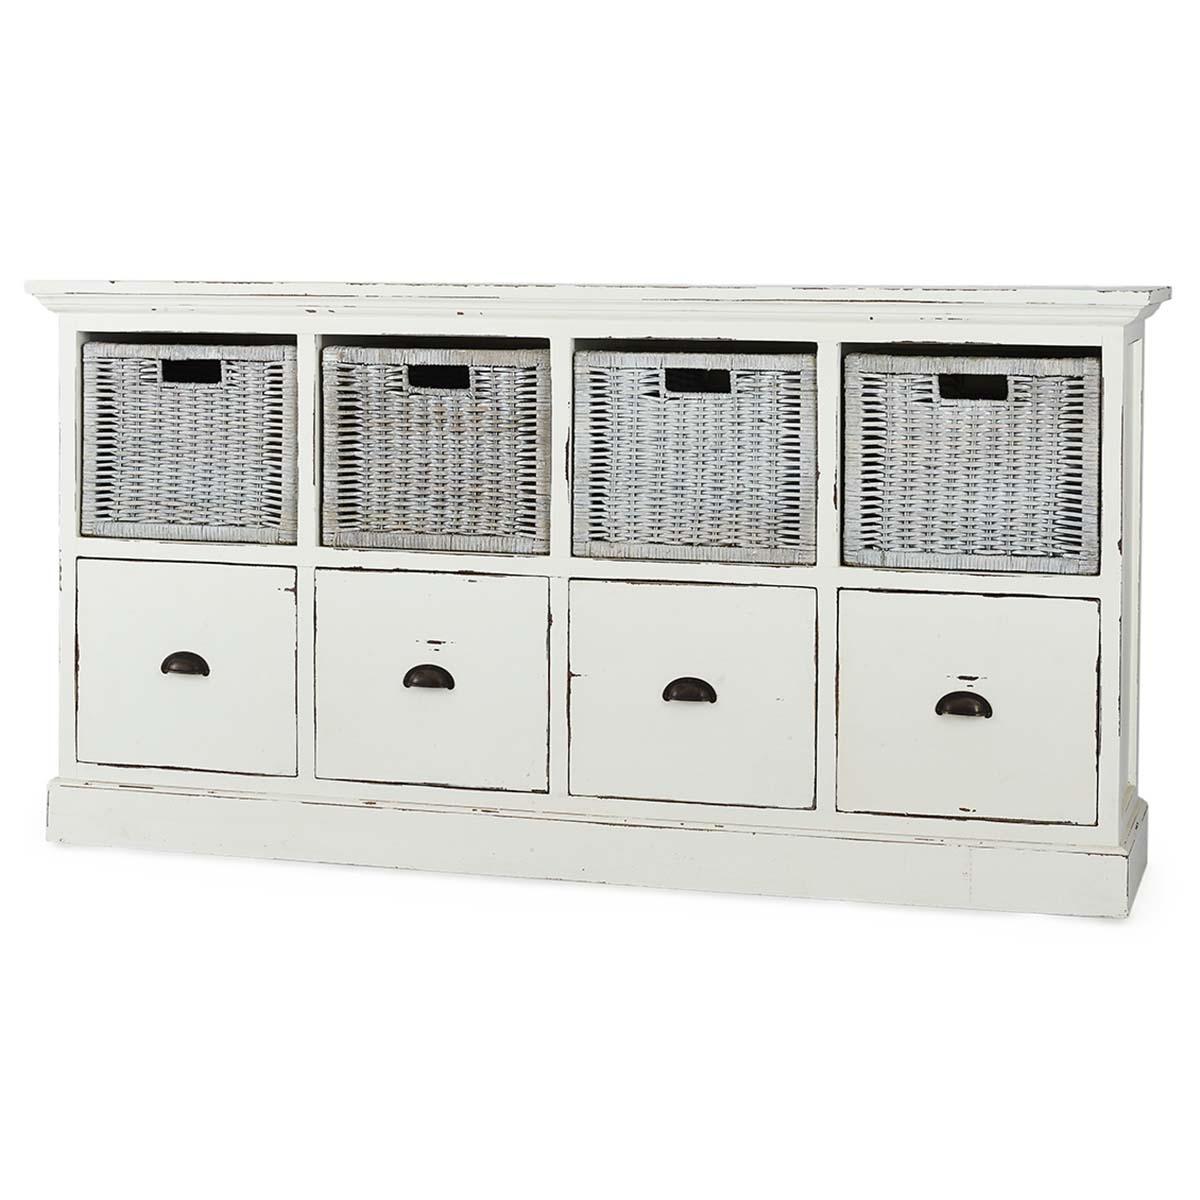 

    
Home Office Cape Cod Storage WHITE WHD RWHD Solid Wood Bramble 25891 Sp Order
